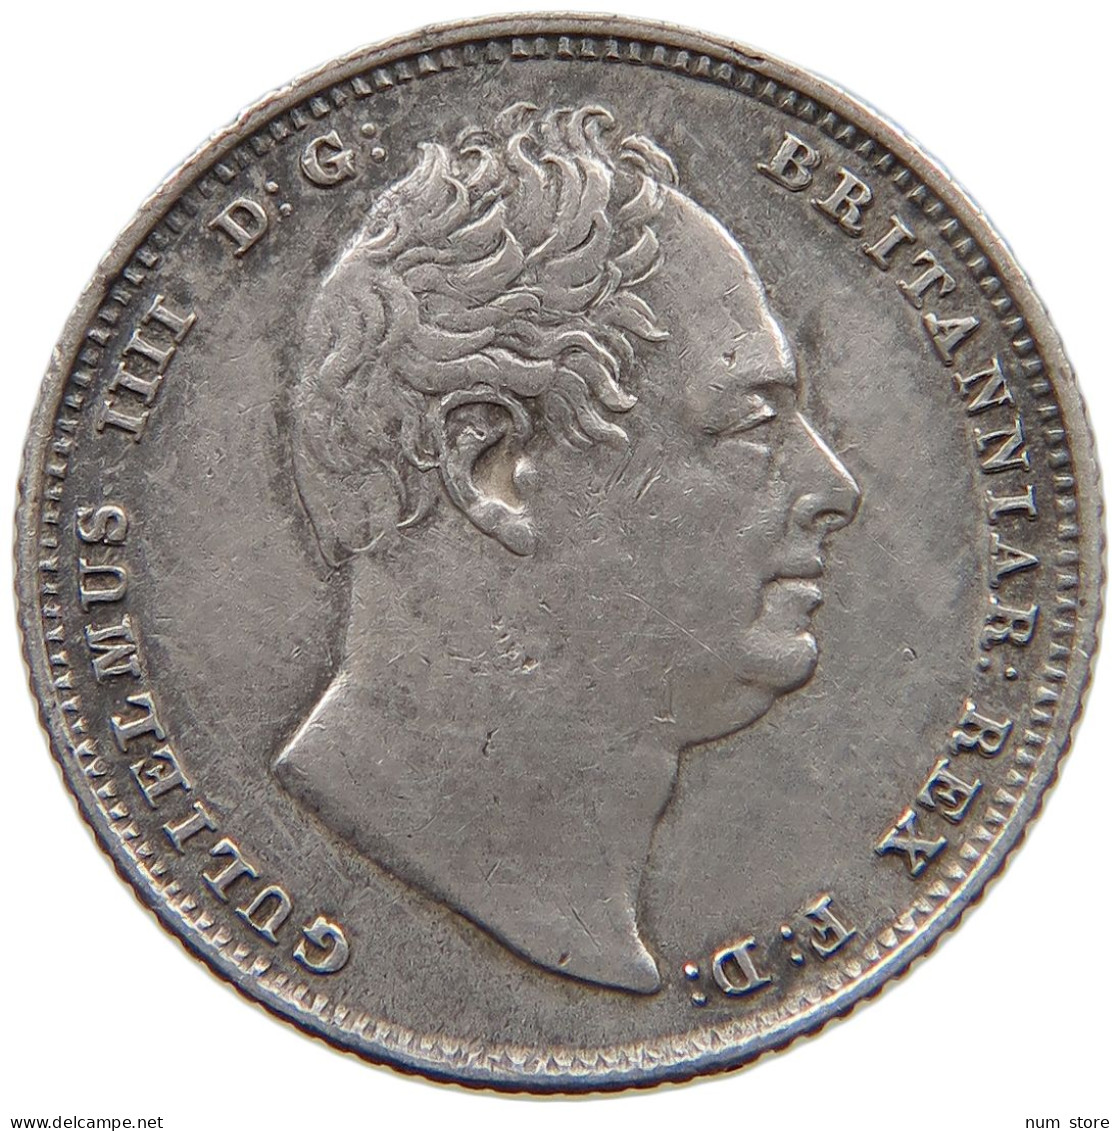 GREAT BRITAIN SIXPENCE 1834 WILLIAM IV. (1830-1837) #t158 0399 - H. 6 Pence